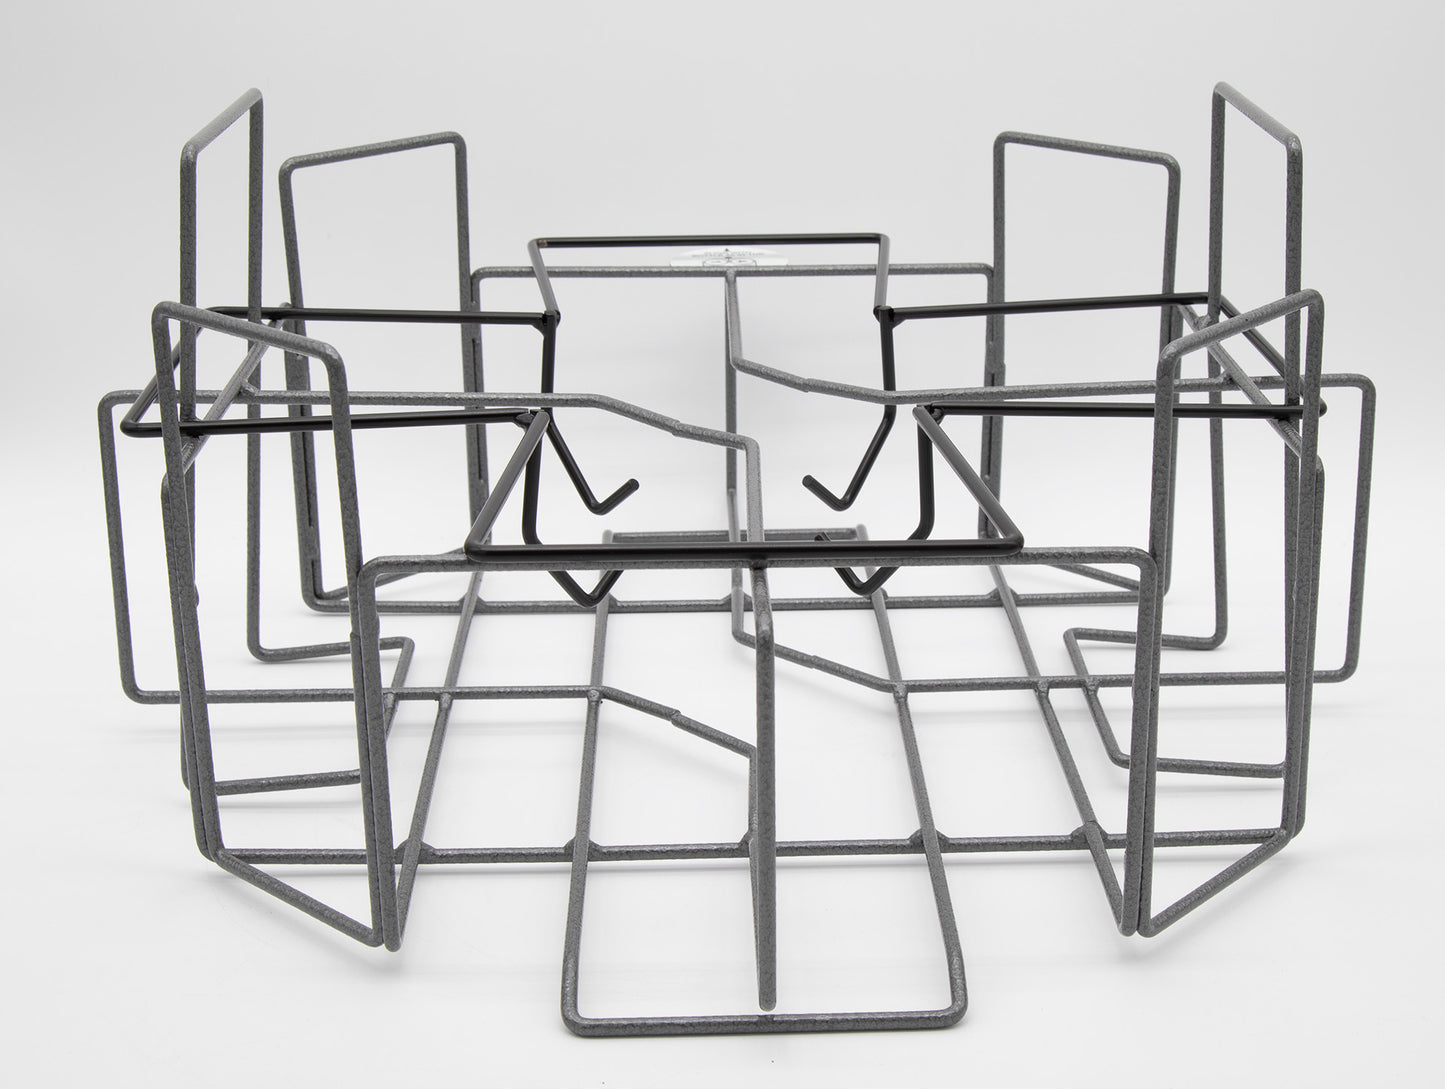 A wire frame with handles